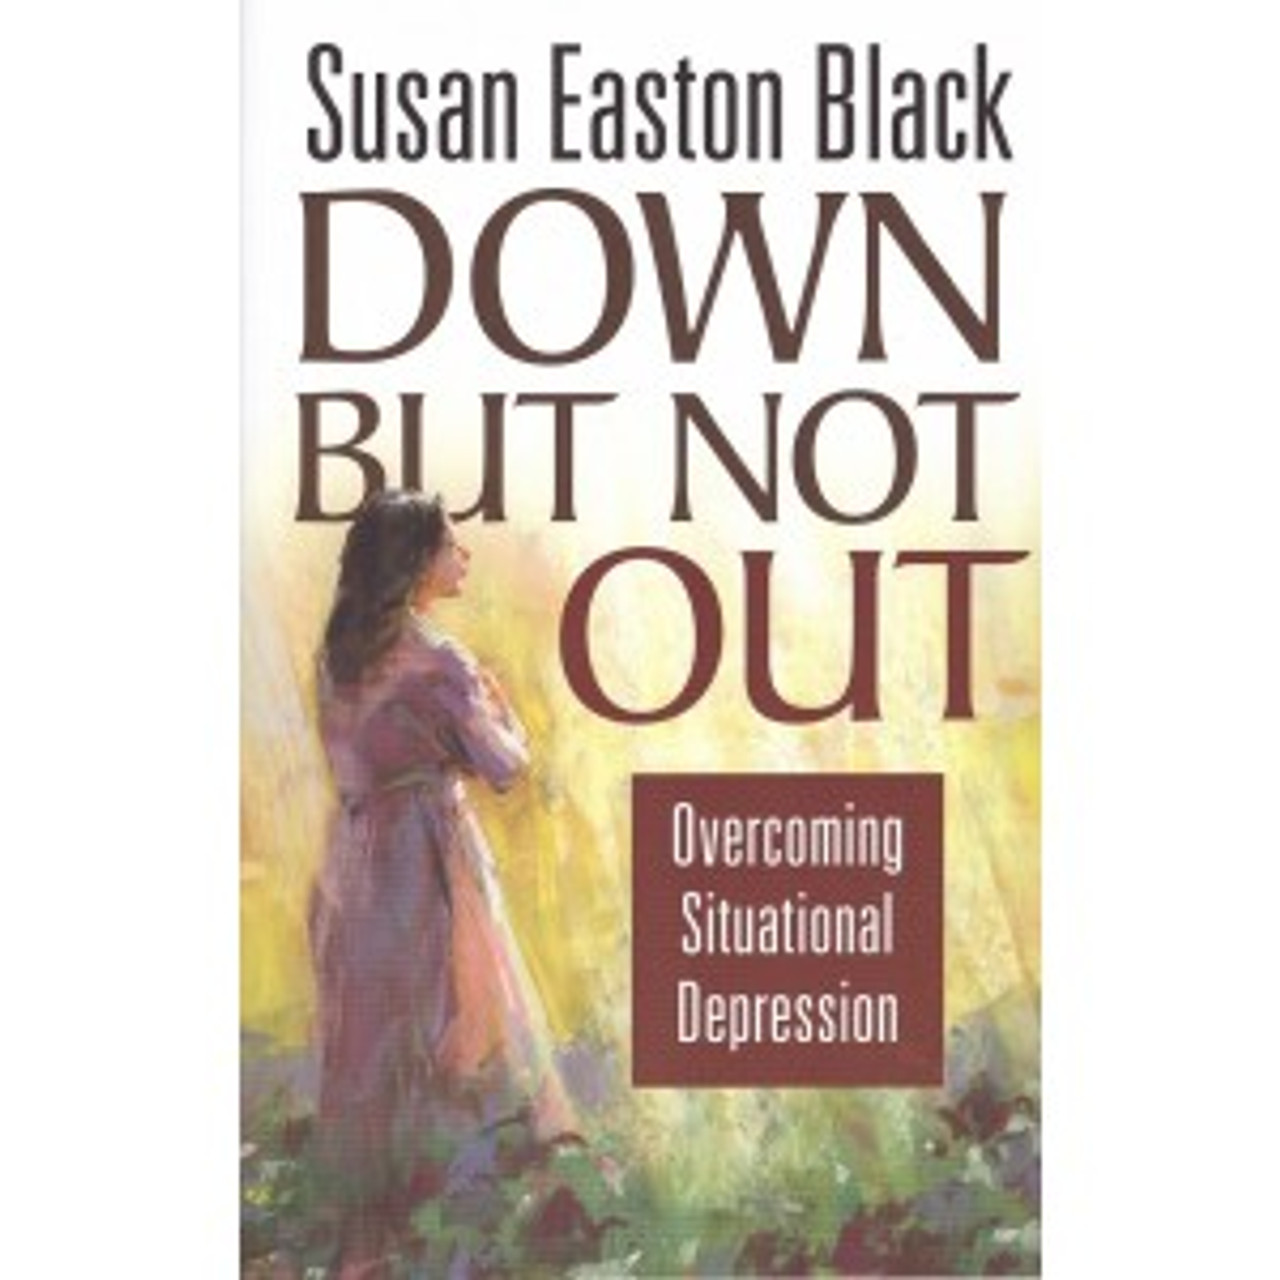 Down But Not Out  (Paperback) *